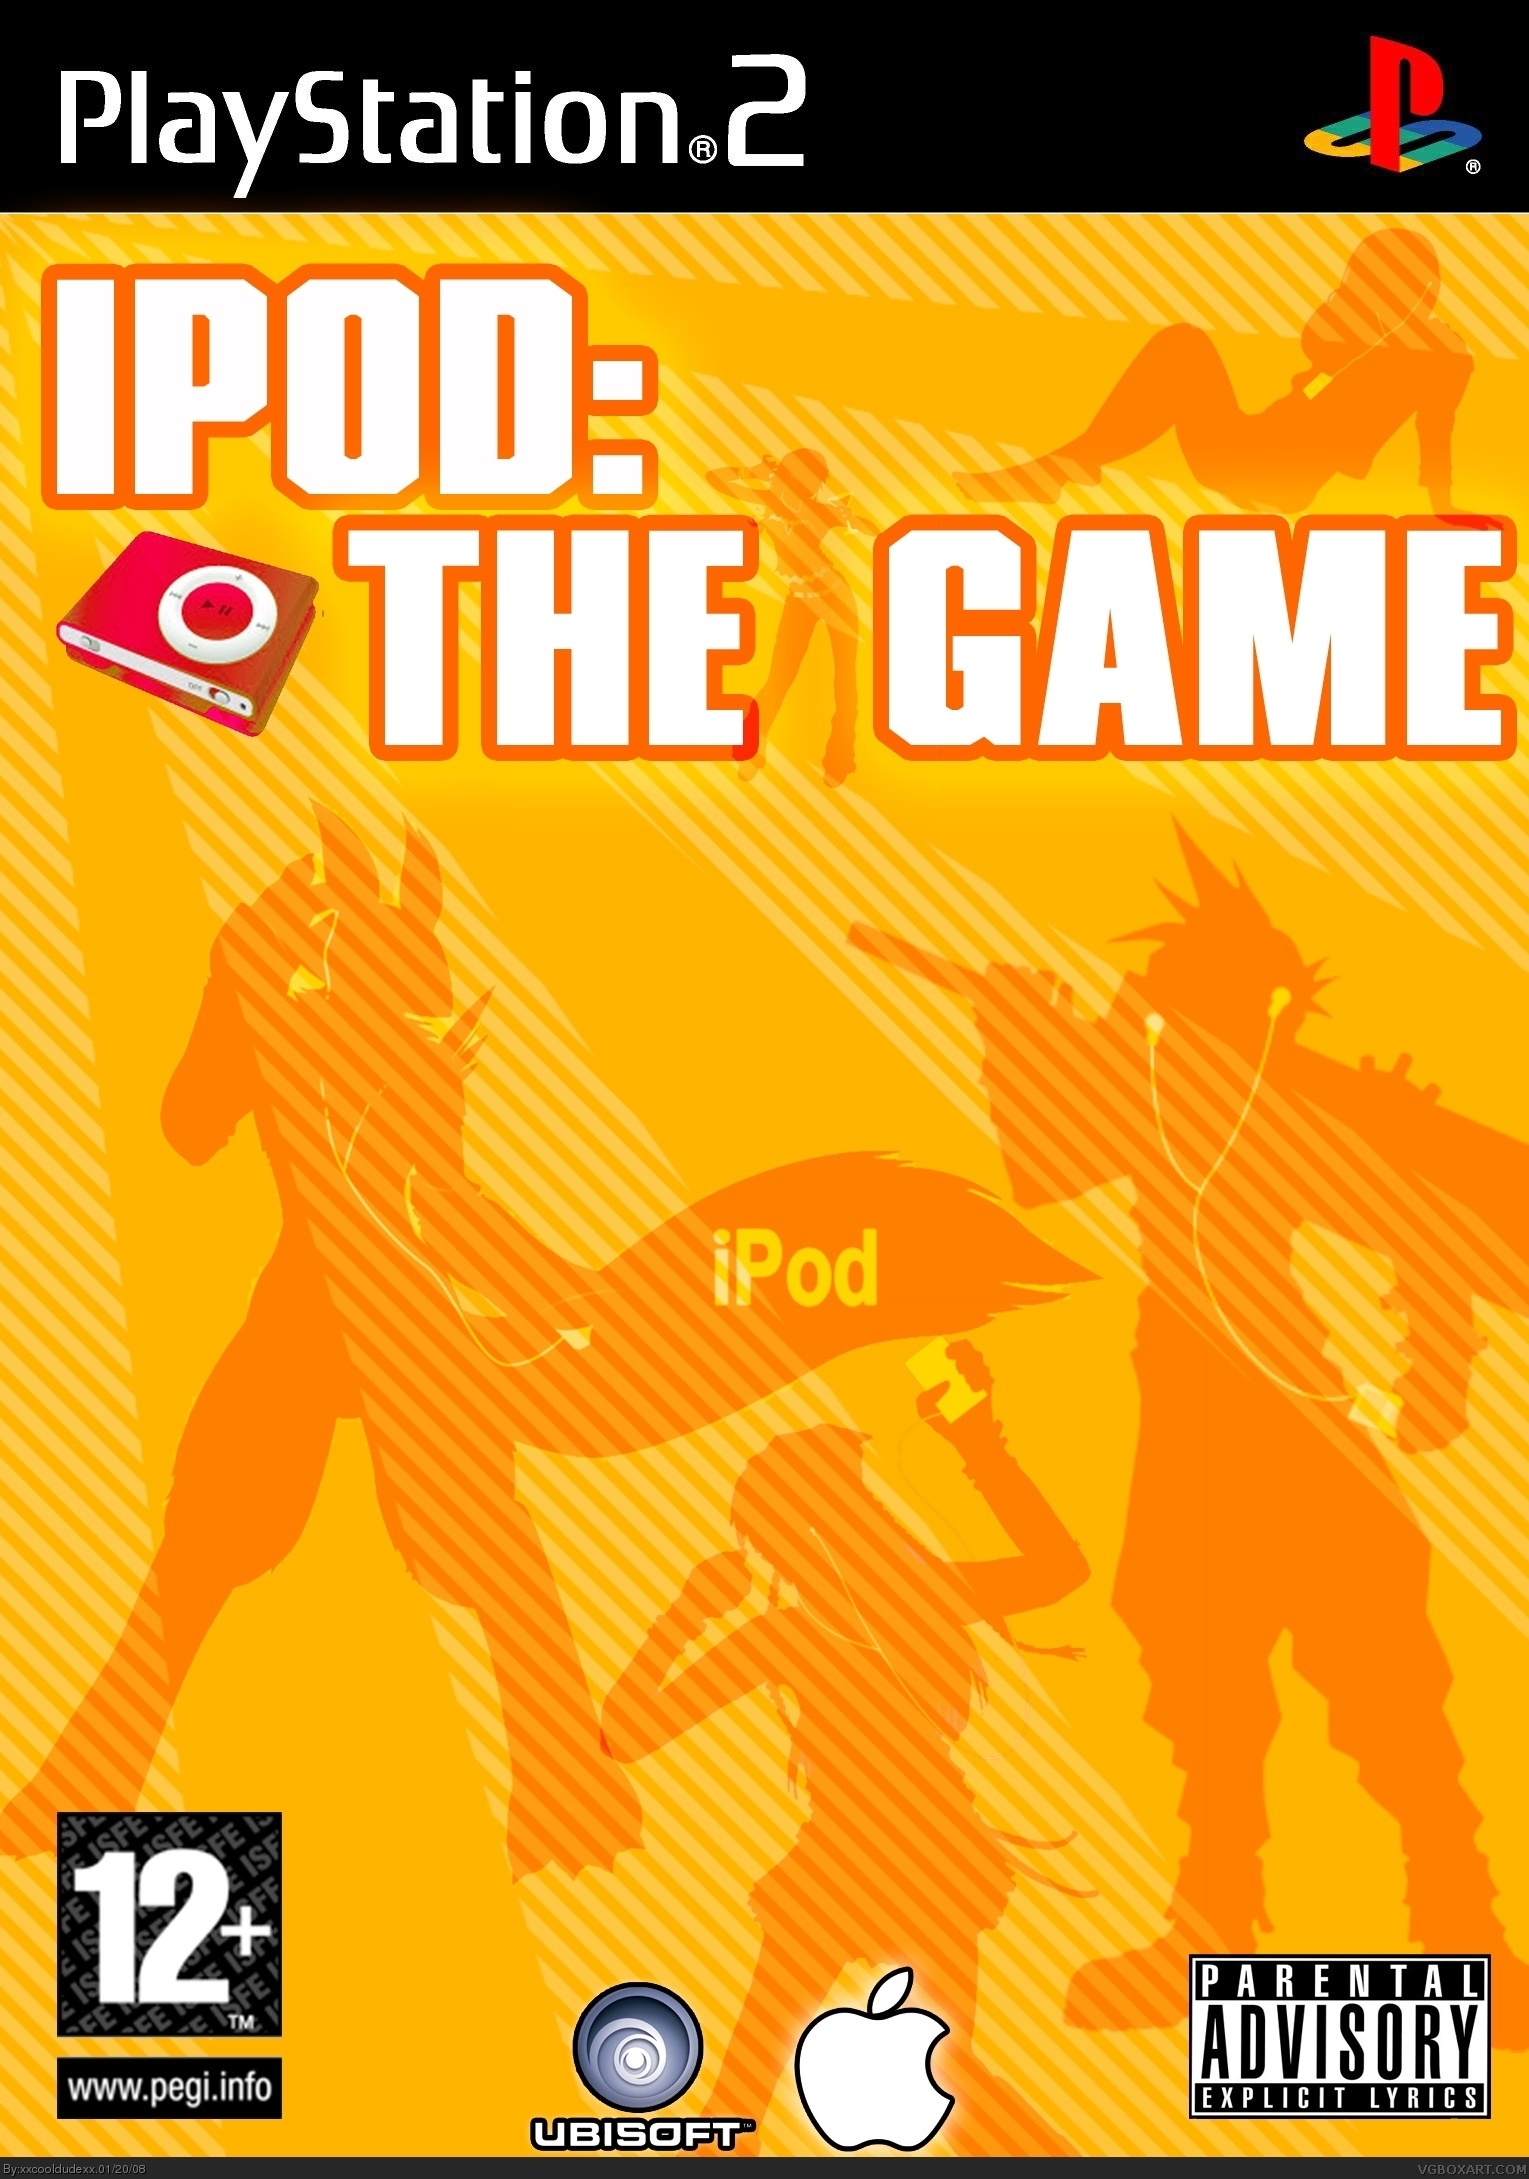 download the last version for ipod War Games